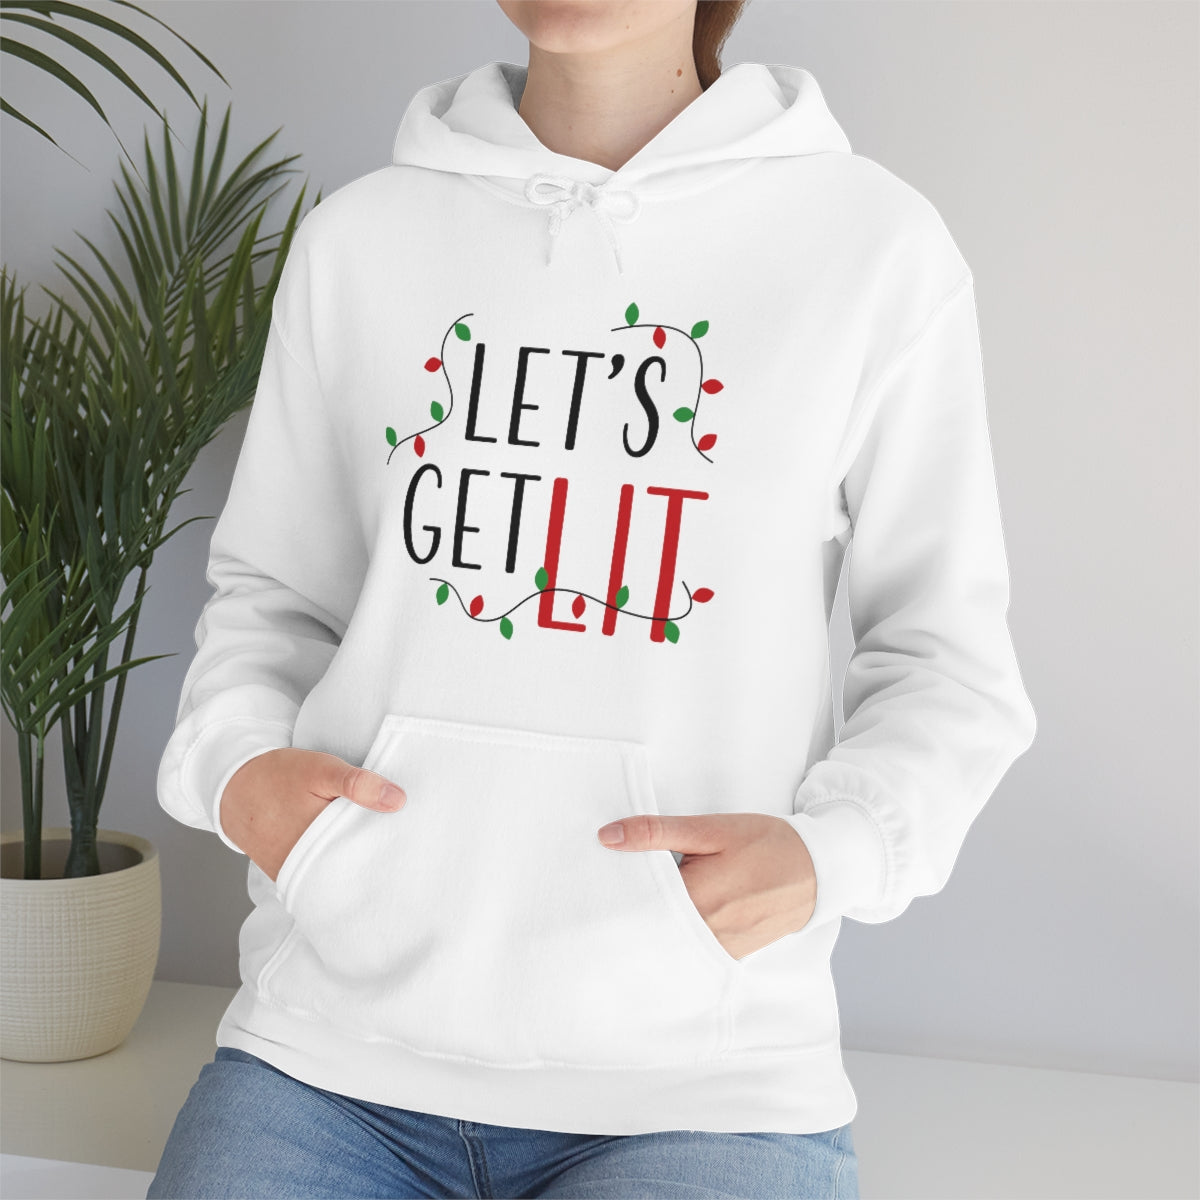 Mock up of a woman wearing our White Holiday Pullover Hoodie while sitting on a bench